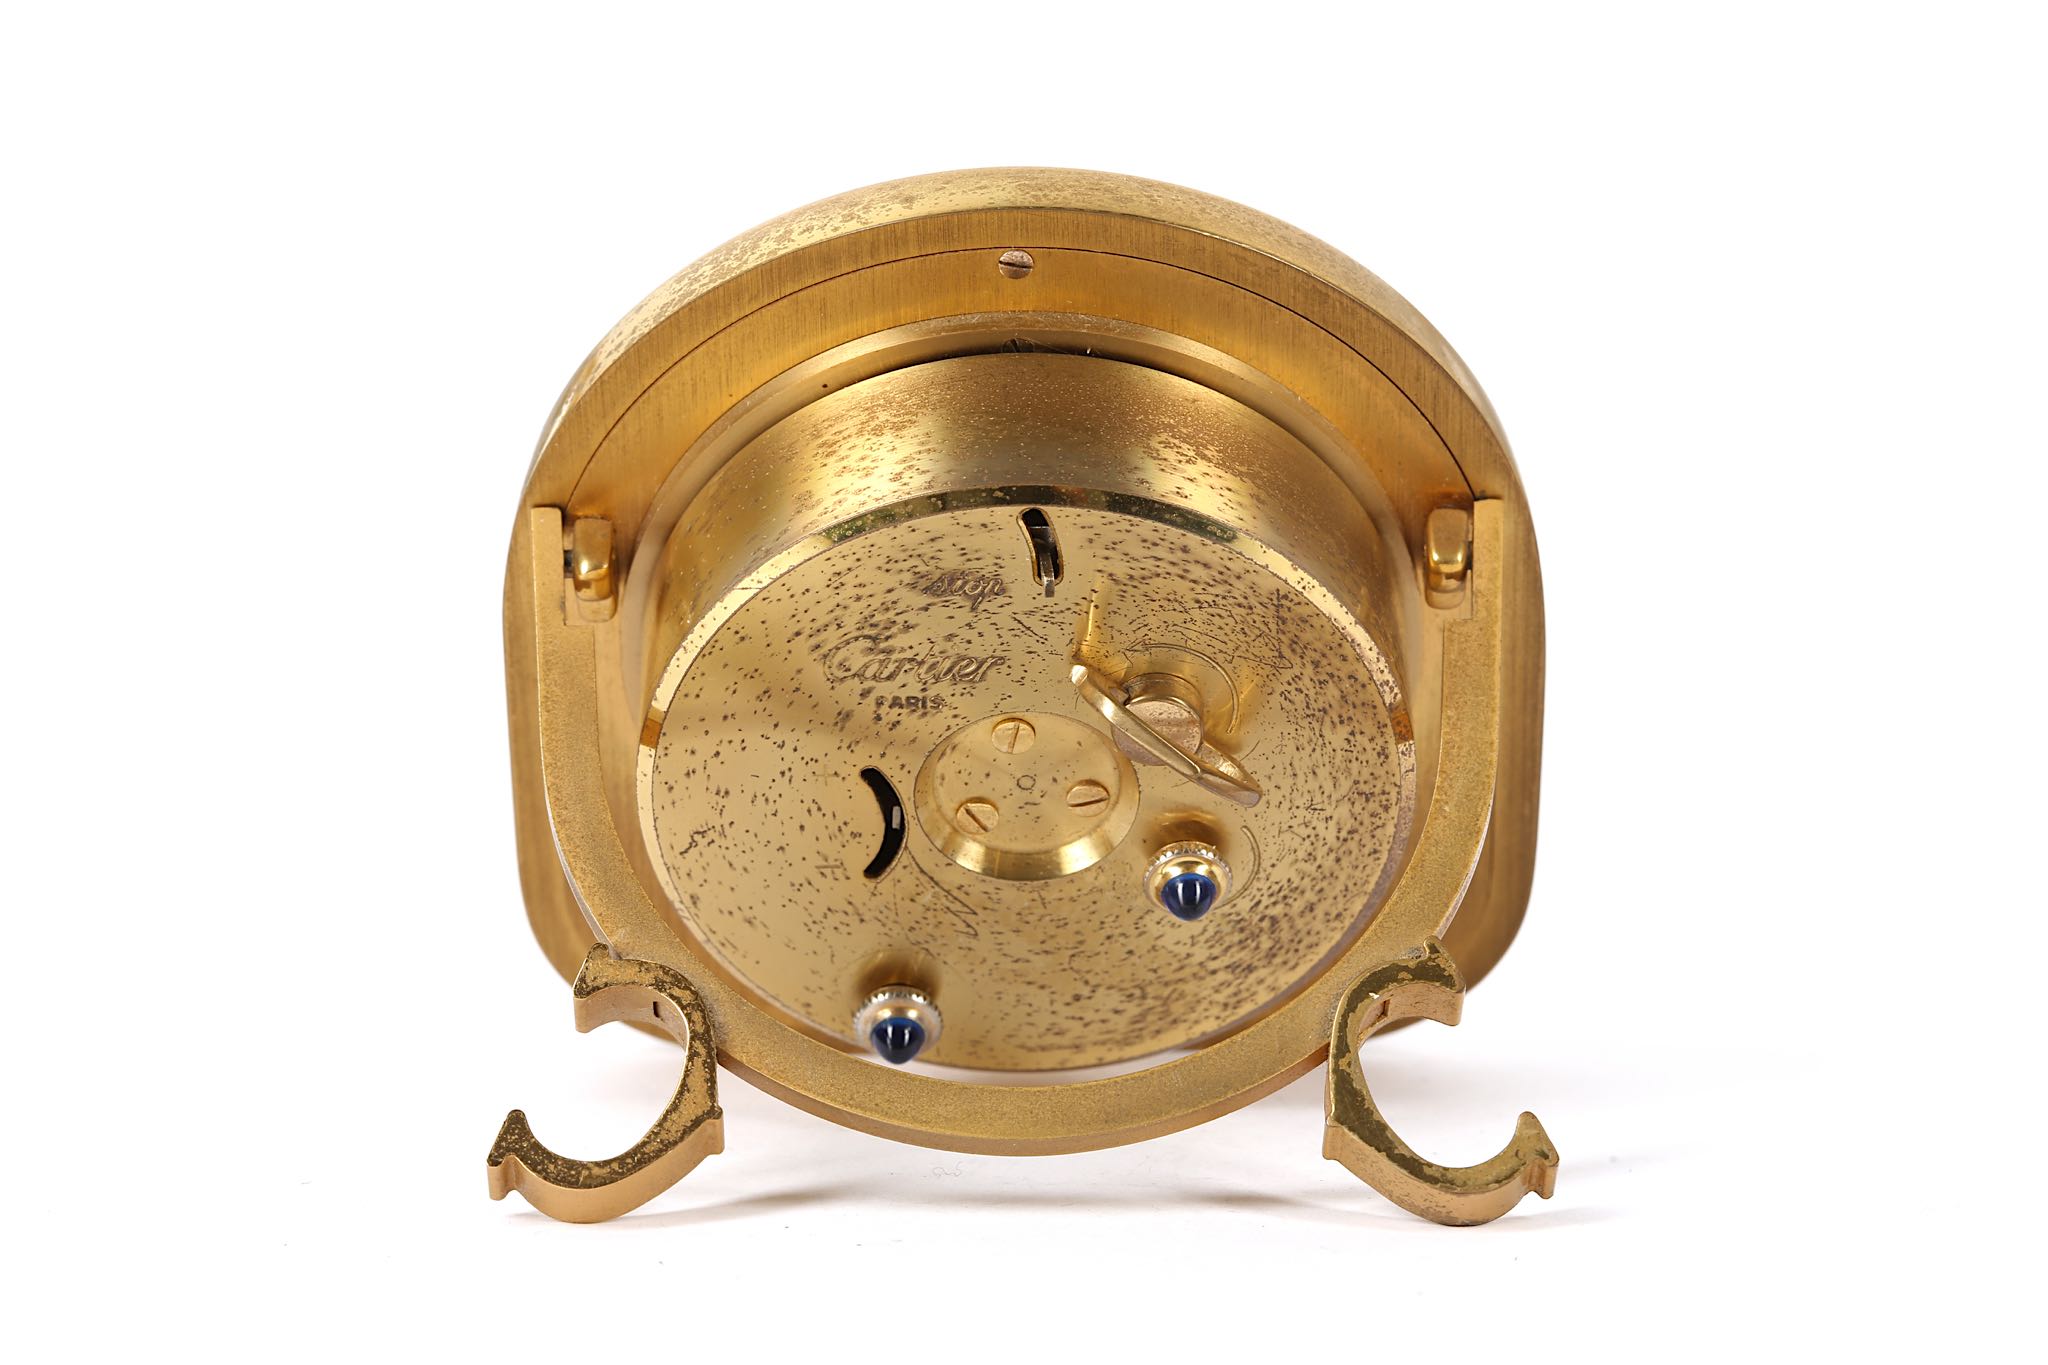 A LATE 20TH CENTURY CARTIER GILT BRASS ALARM CLOCK of arched frame form with cream enamel - Image 3 of 5